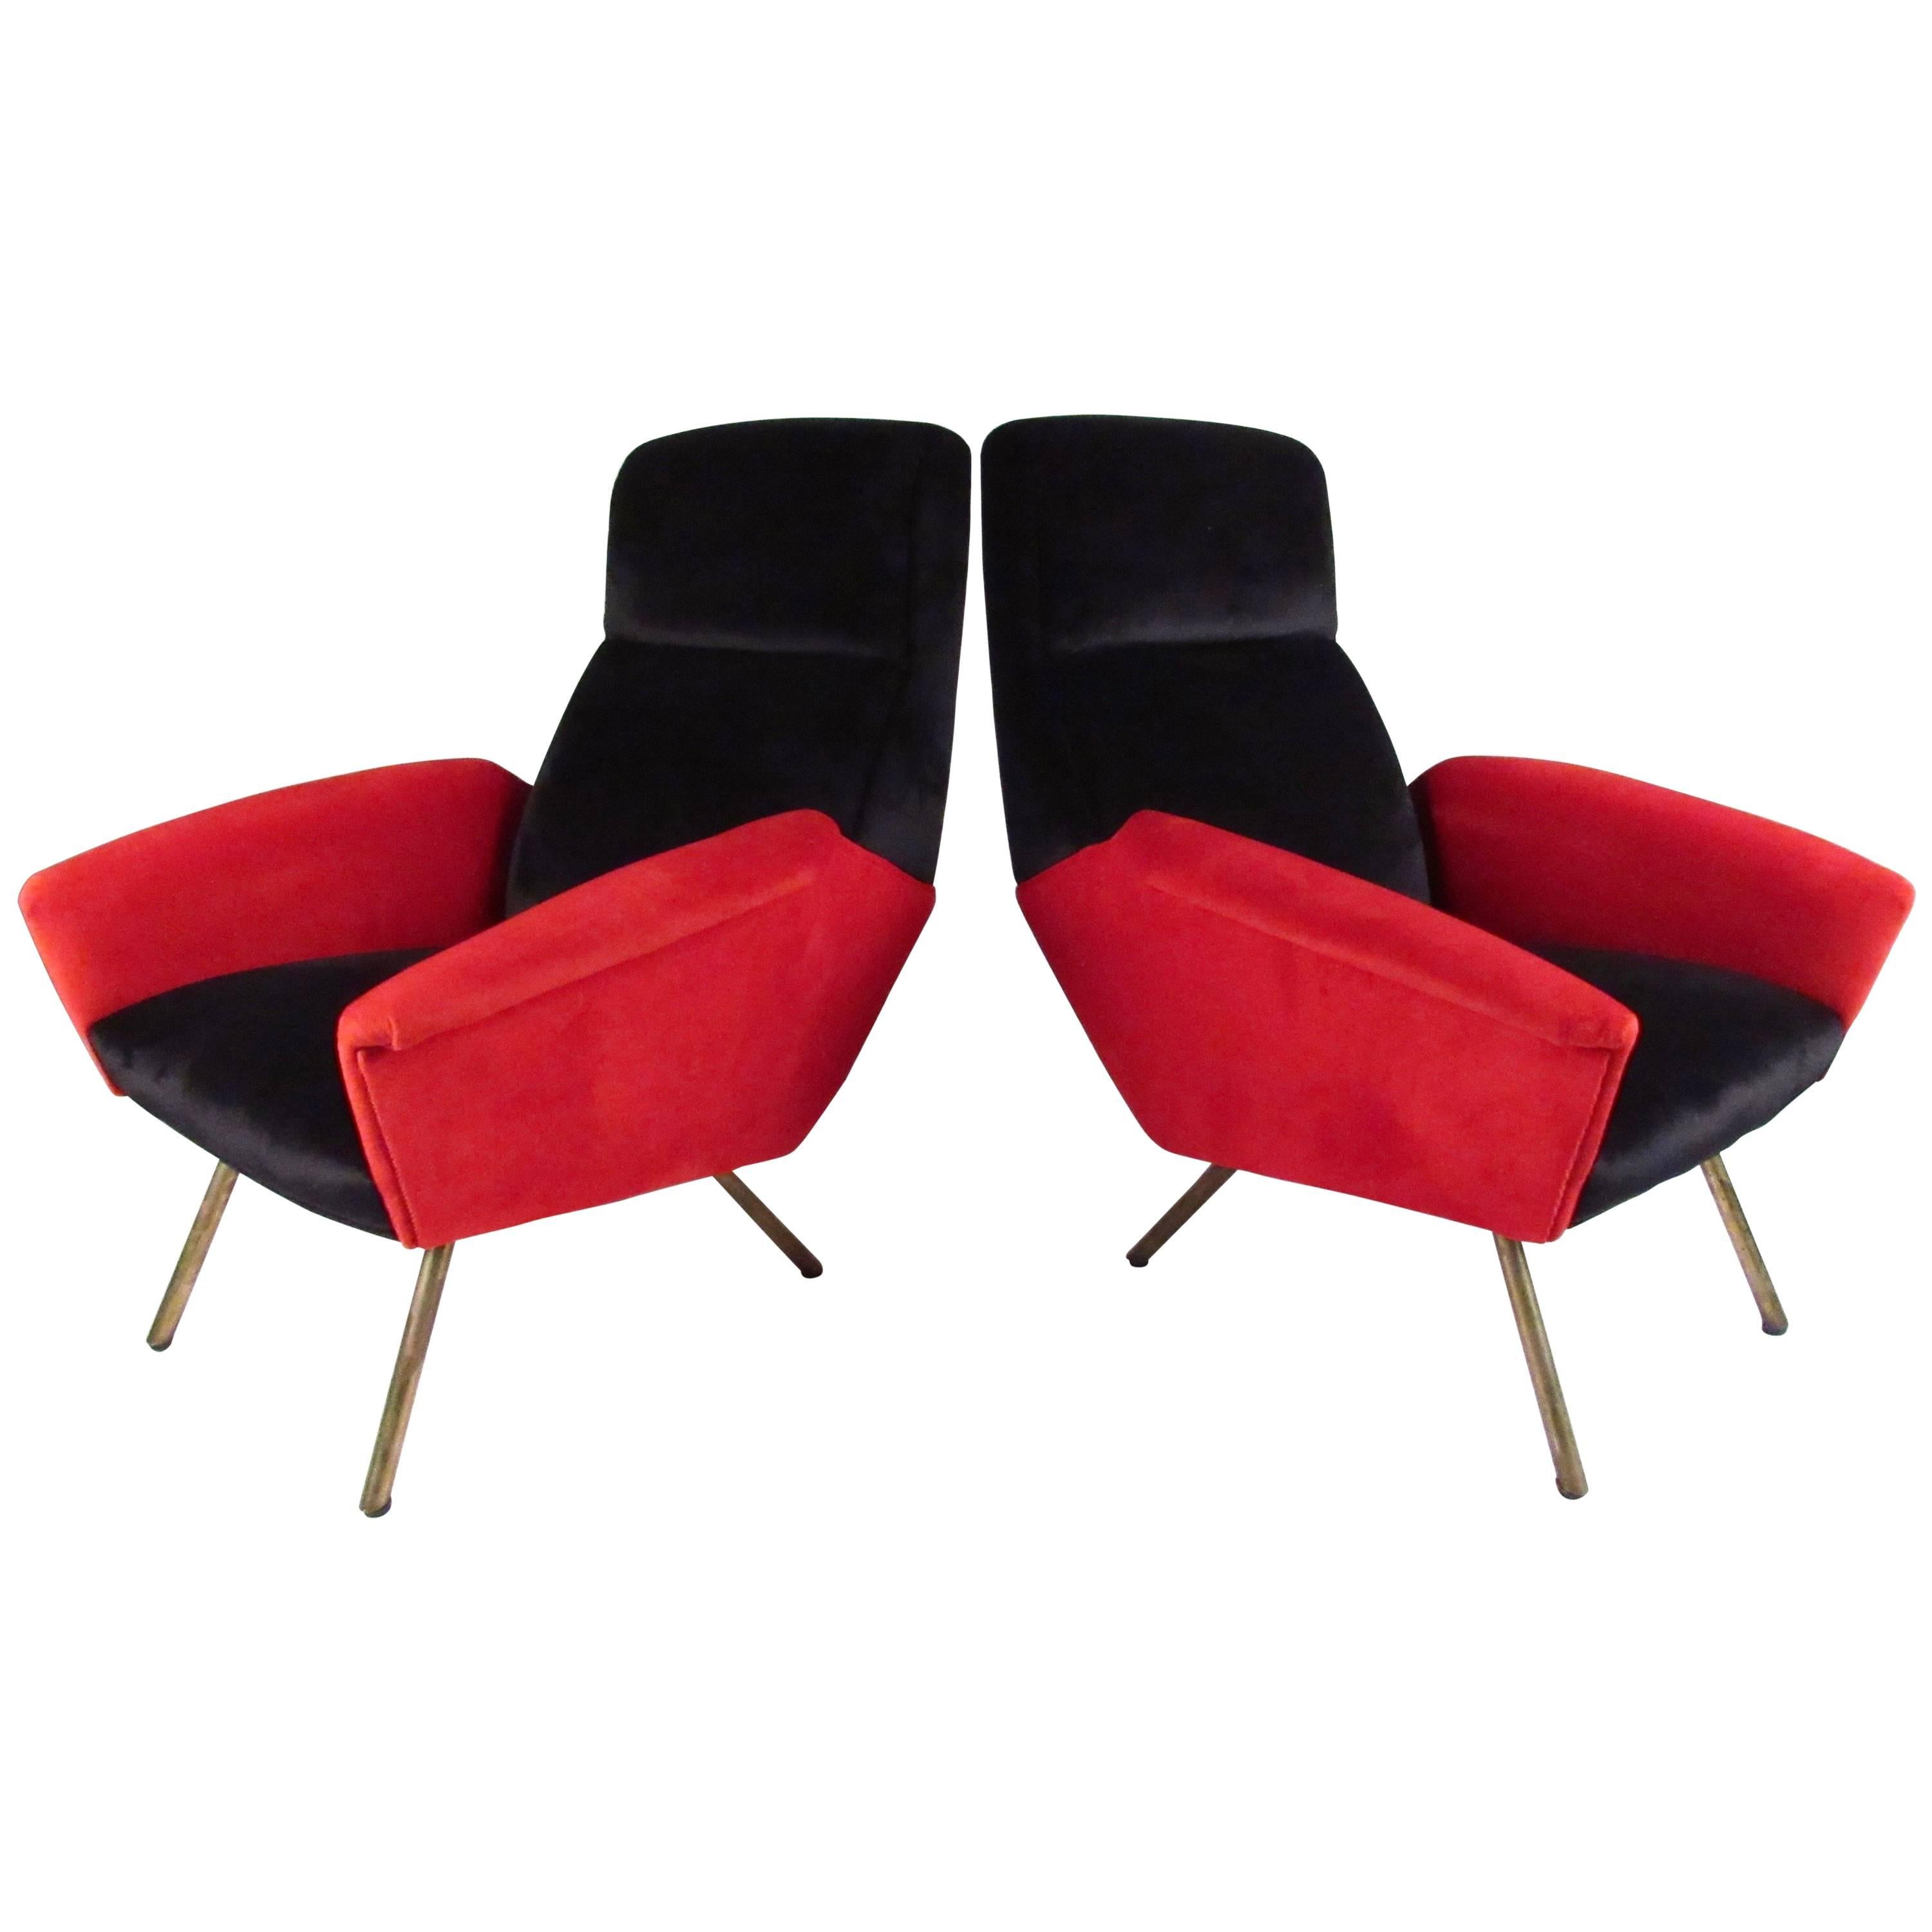 Stylish Pair of Italian Modern Sculptural Lounge Chairs